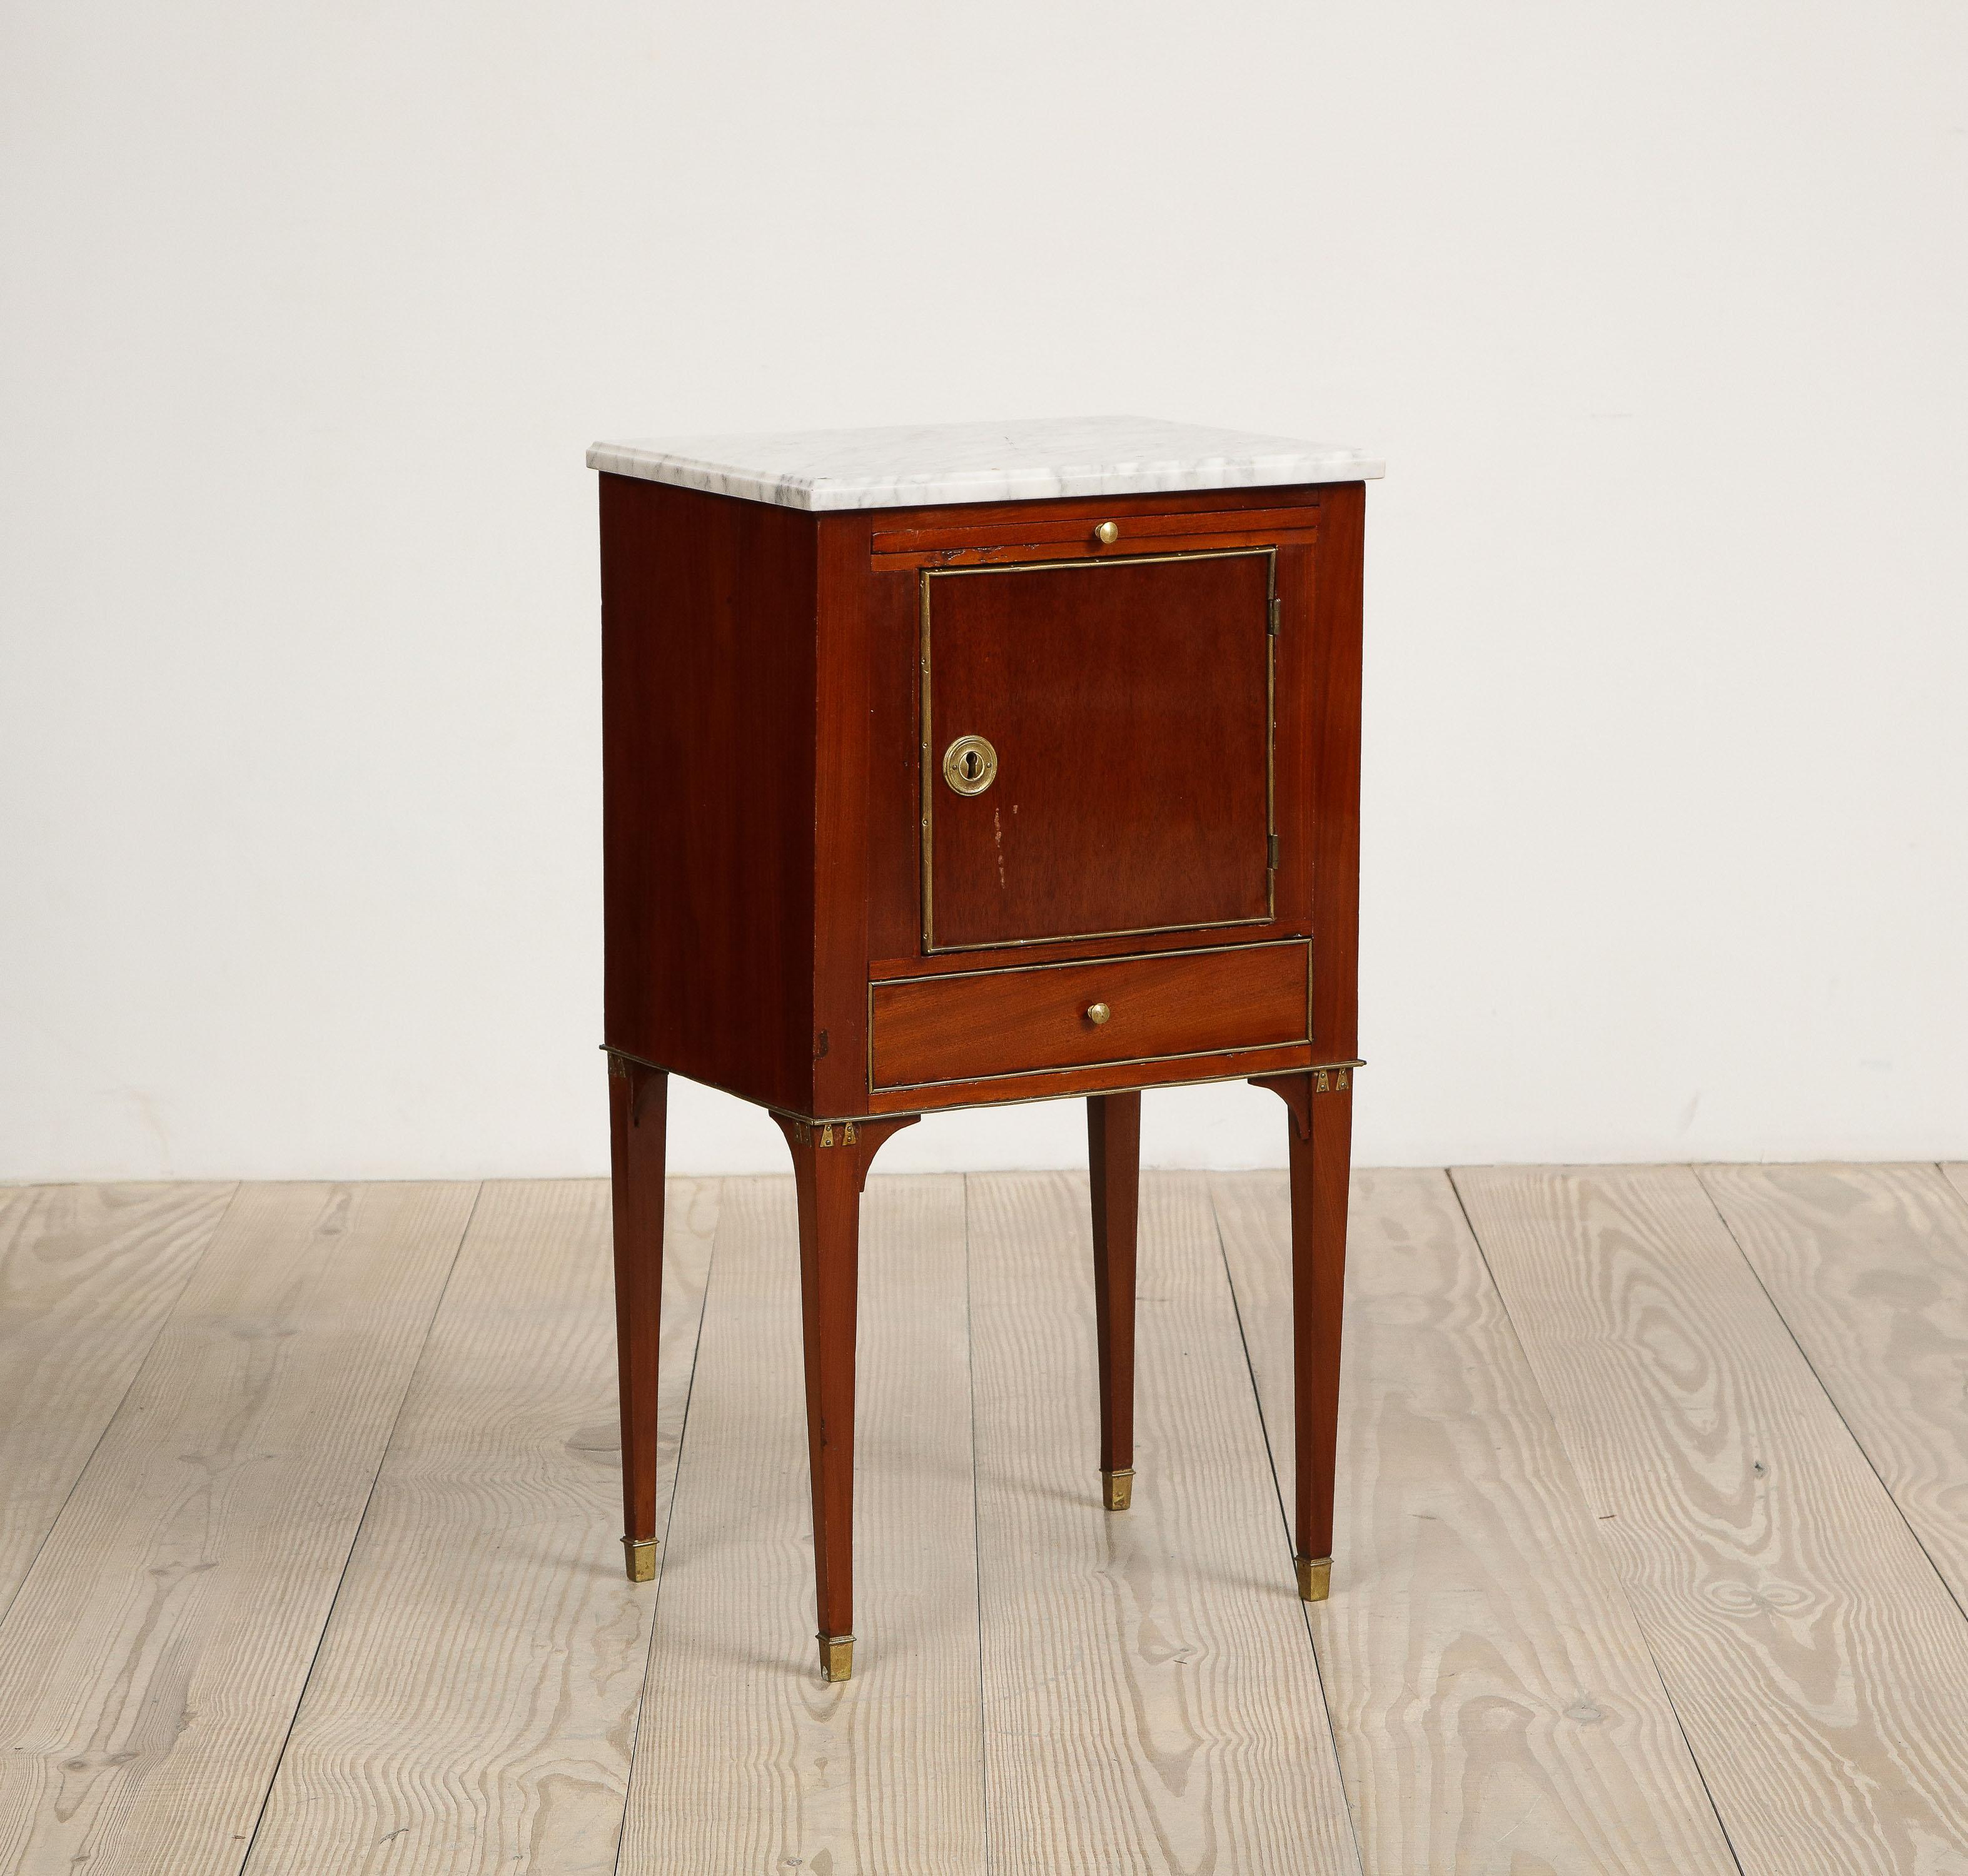 Swedish Mahogany Gustavian-Style with Marble Top Side Table/Cabinet, circa 1850 For Sale 3